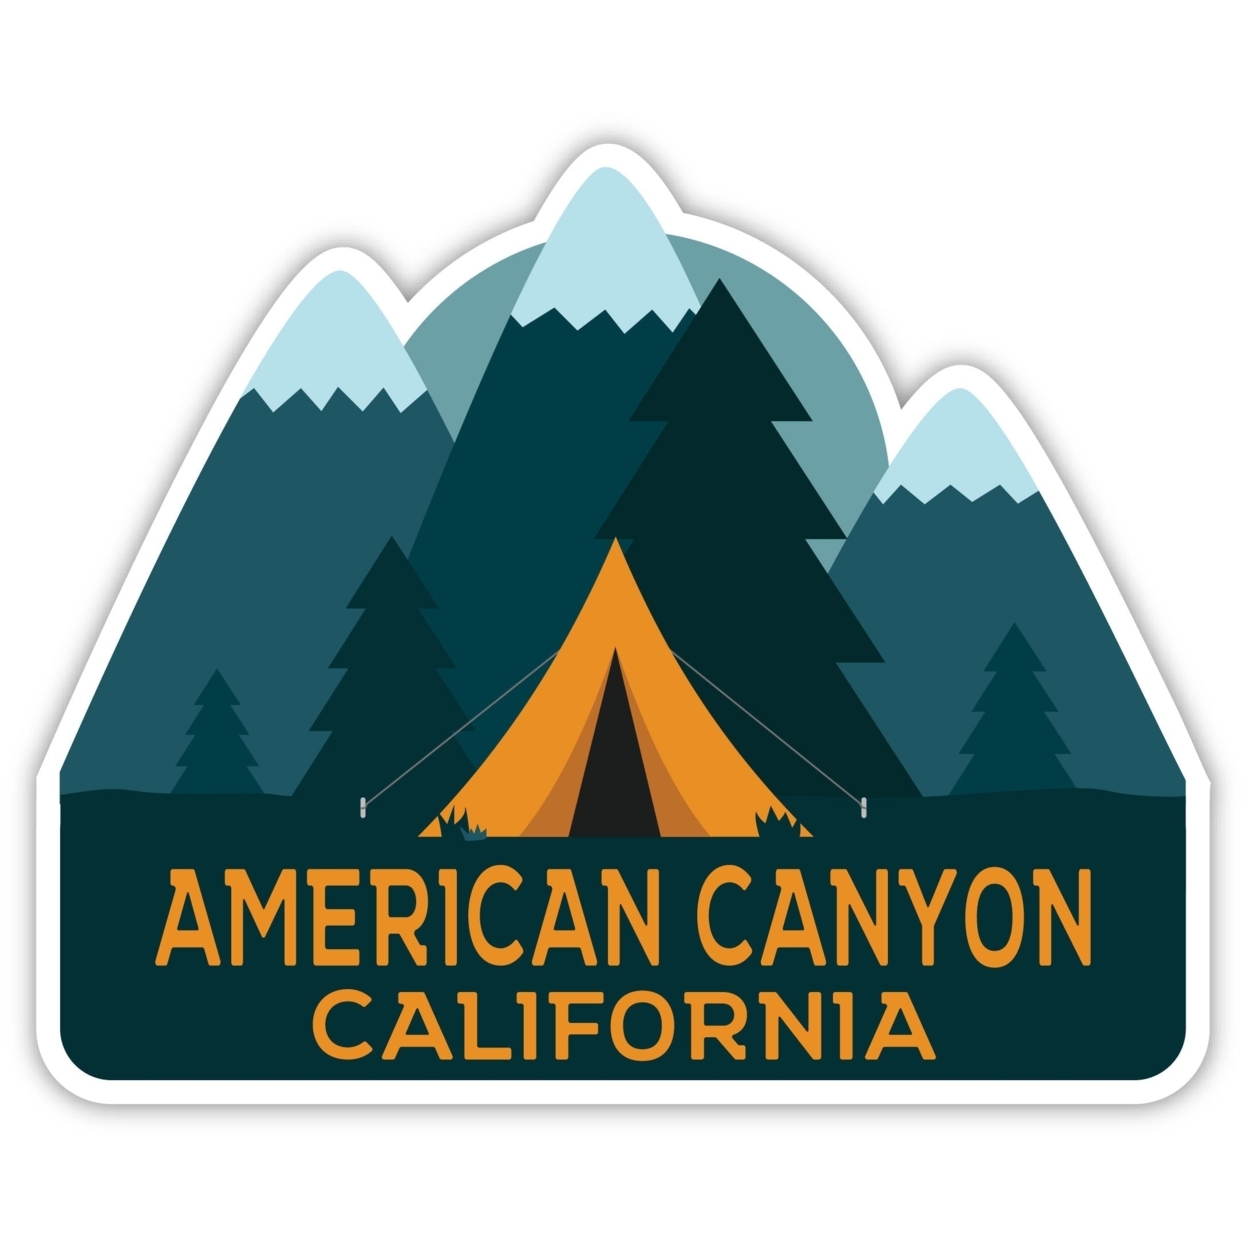 American Canyon California Souvenir Decorative Stickers (Choose Theme And Size) - 4-Pack, 10-Inch, Tent